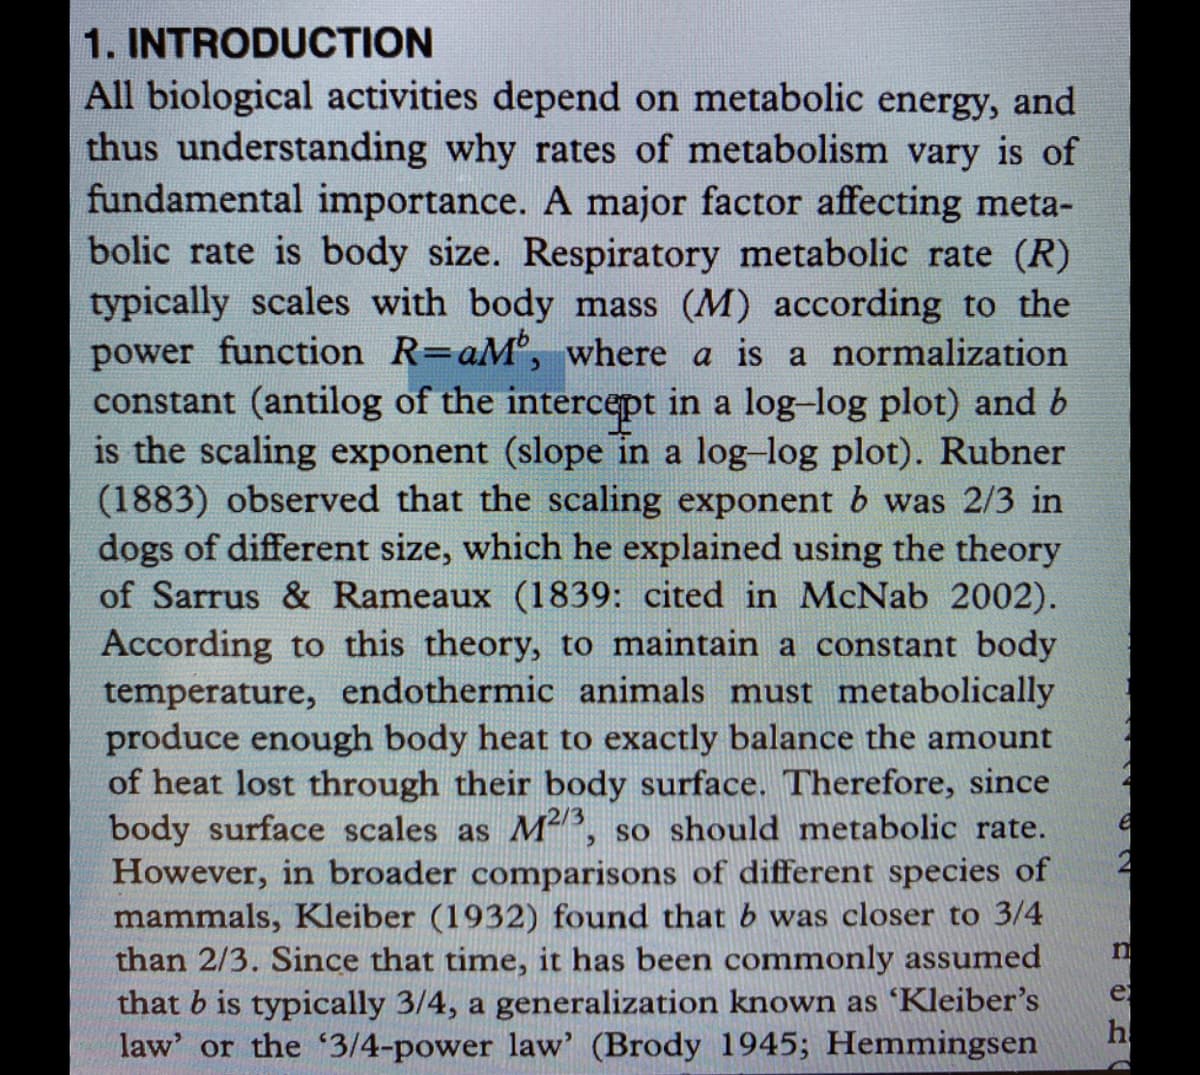 1. INTRODUCTION
All biological activities depend on metabolic energy, and
thus understanding why rates of metabolism vary is of
fundamental importance. A major factor affecting meta-
bolic rate is body size. Respiratory metabolic rate (R)
typically scales with body mass (M) according to the
power function R=aM, where a is a normalization
constant (antilog of the intercept in a log-log plot) and b
is the scaling exponent (slope in a log-log plot). Rubner
(1883) observed that the scaling exponent b was 2/3 in
dogs of different size, which he explained using the theory
of Sarrus & Rameaux (1839: cited in McNab 2002).
According to this theory, to maintain a constant body
temperature, endothermic animals must metabolically
produce enough body heat to exactly balance the amount
of heat lost through their body surface. Therefore, since
body surface scales as M, so should metabolic rate.
However, in broader comparisons of different species of
mammals, Kleiber (1932) found that b was closer to 3/4
than 2/3. Since that time, it has been commonly assumed
that b is typically 3/4, a generalization known as 'Kleiber's
h
e
law' or the 3/4-power law' (Brody 1945; Hemmingsen
